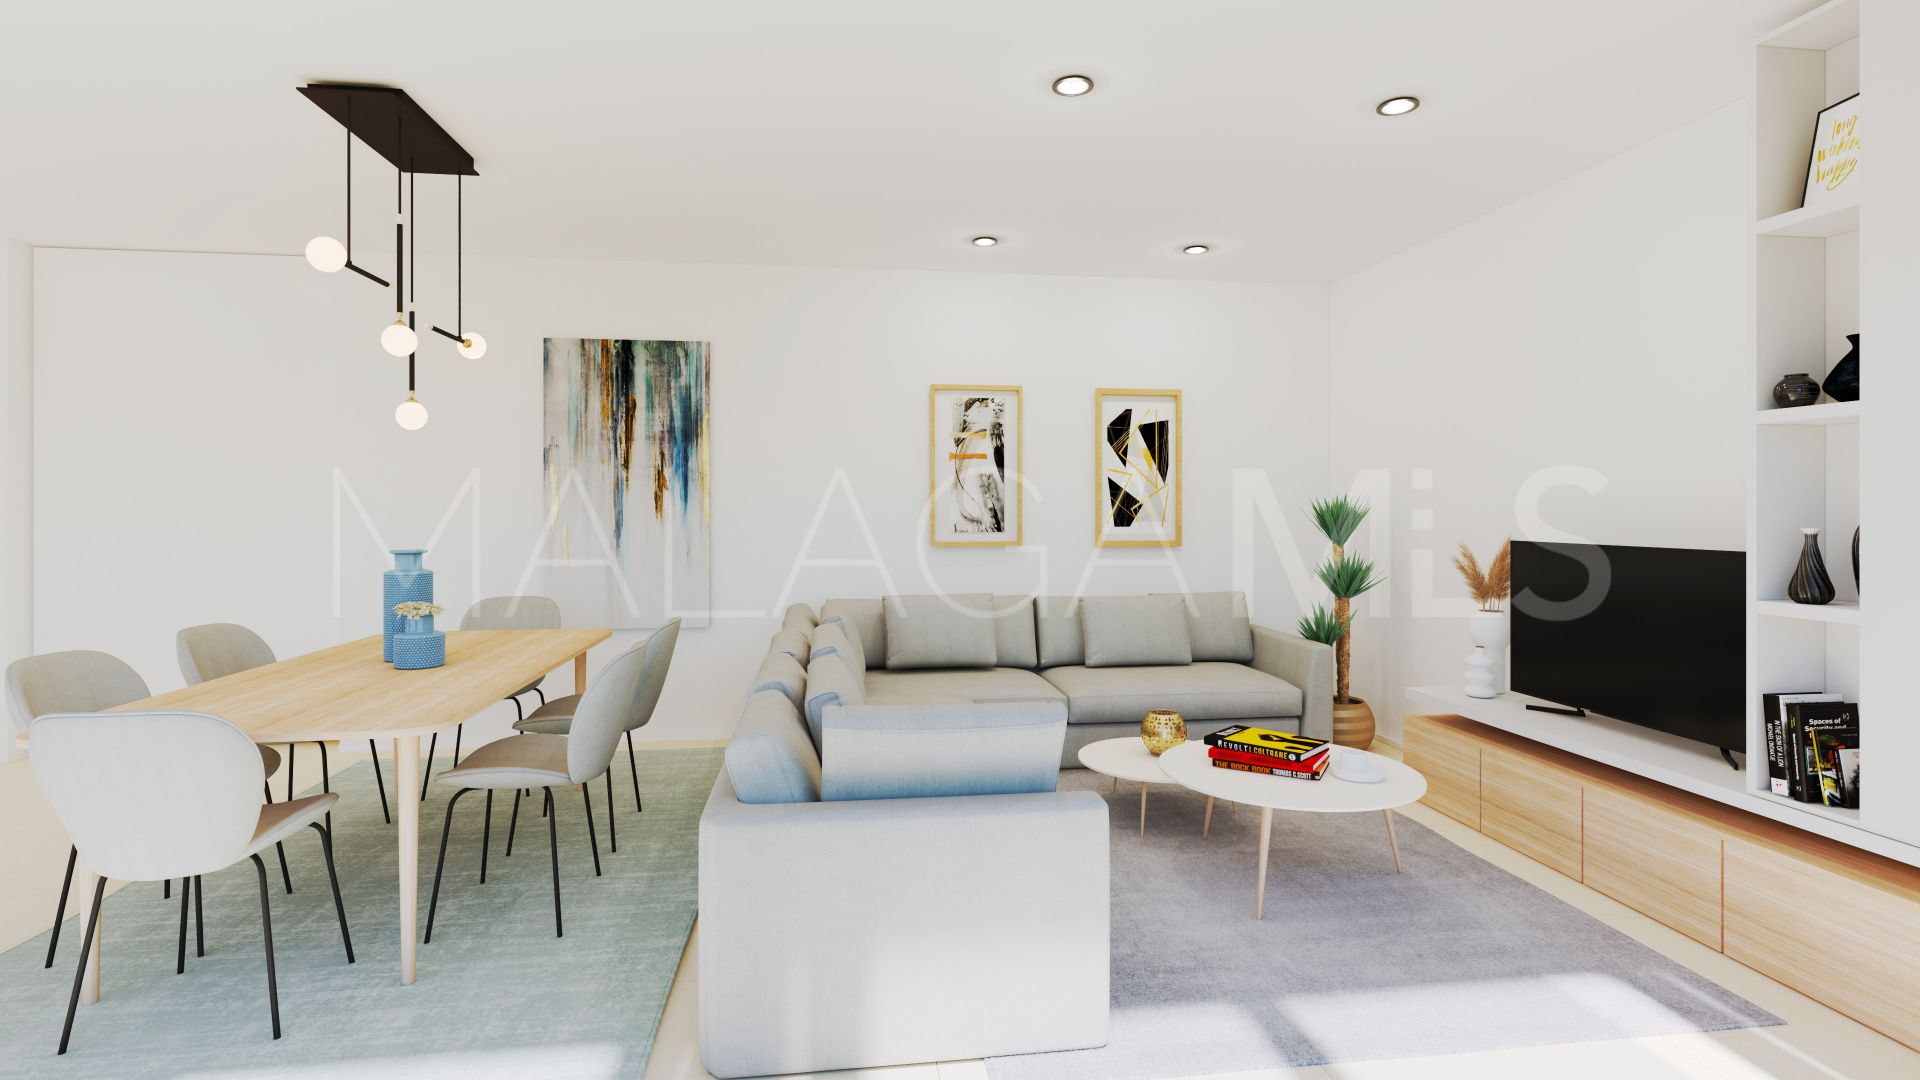 Apartamento for sale in Atalaya with 2 bedrooms